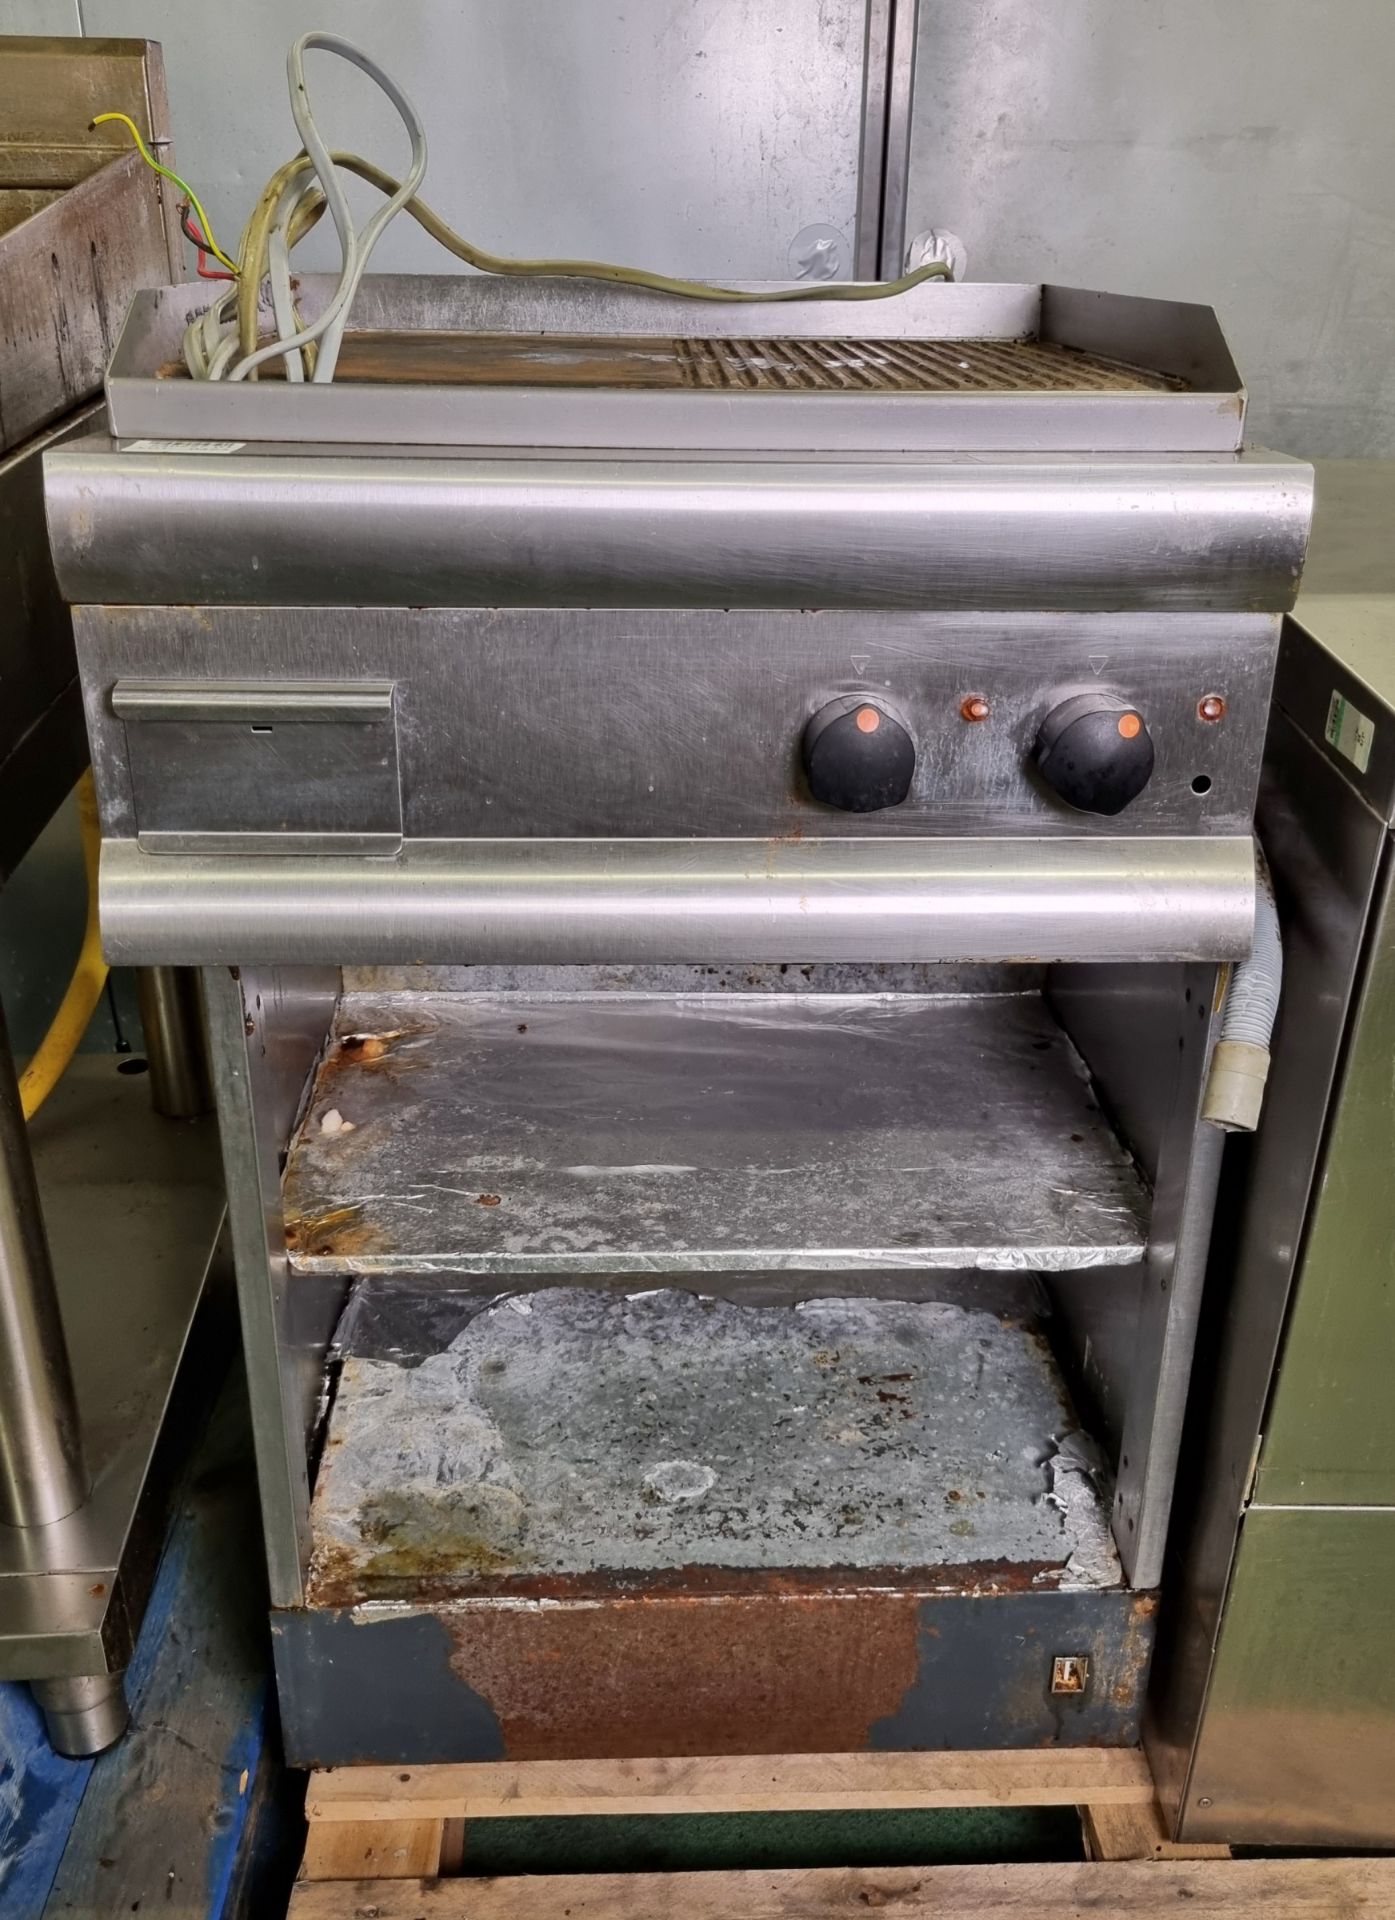 Lincat electric griddle with stand - W 600 x D 600 x H 950 mm